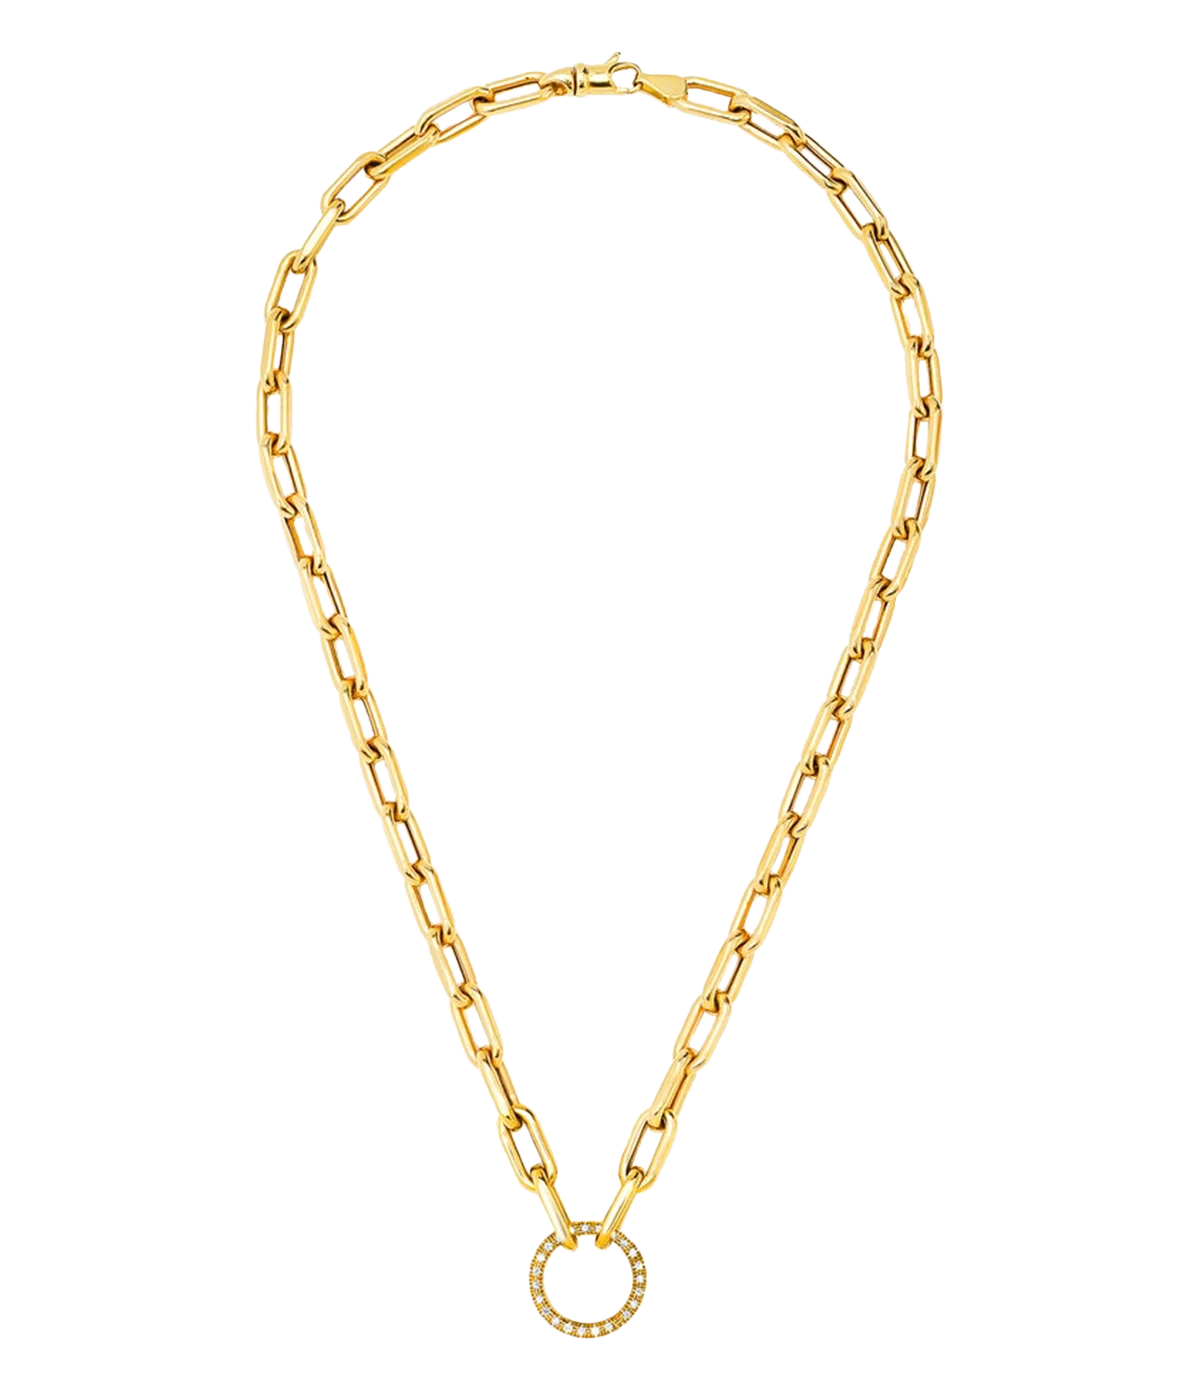 Open Link Diamond Charm Necklace in 14k Yellow Gold